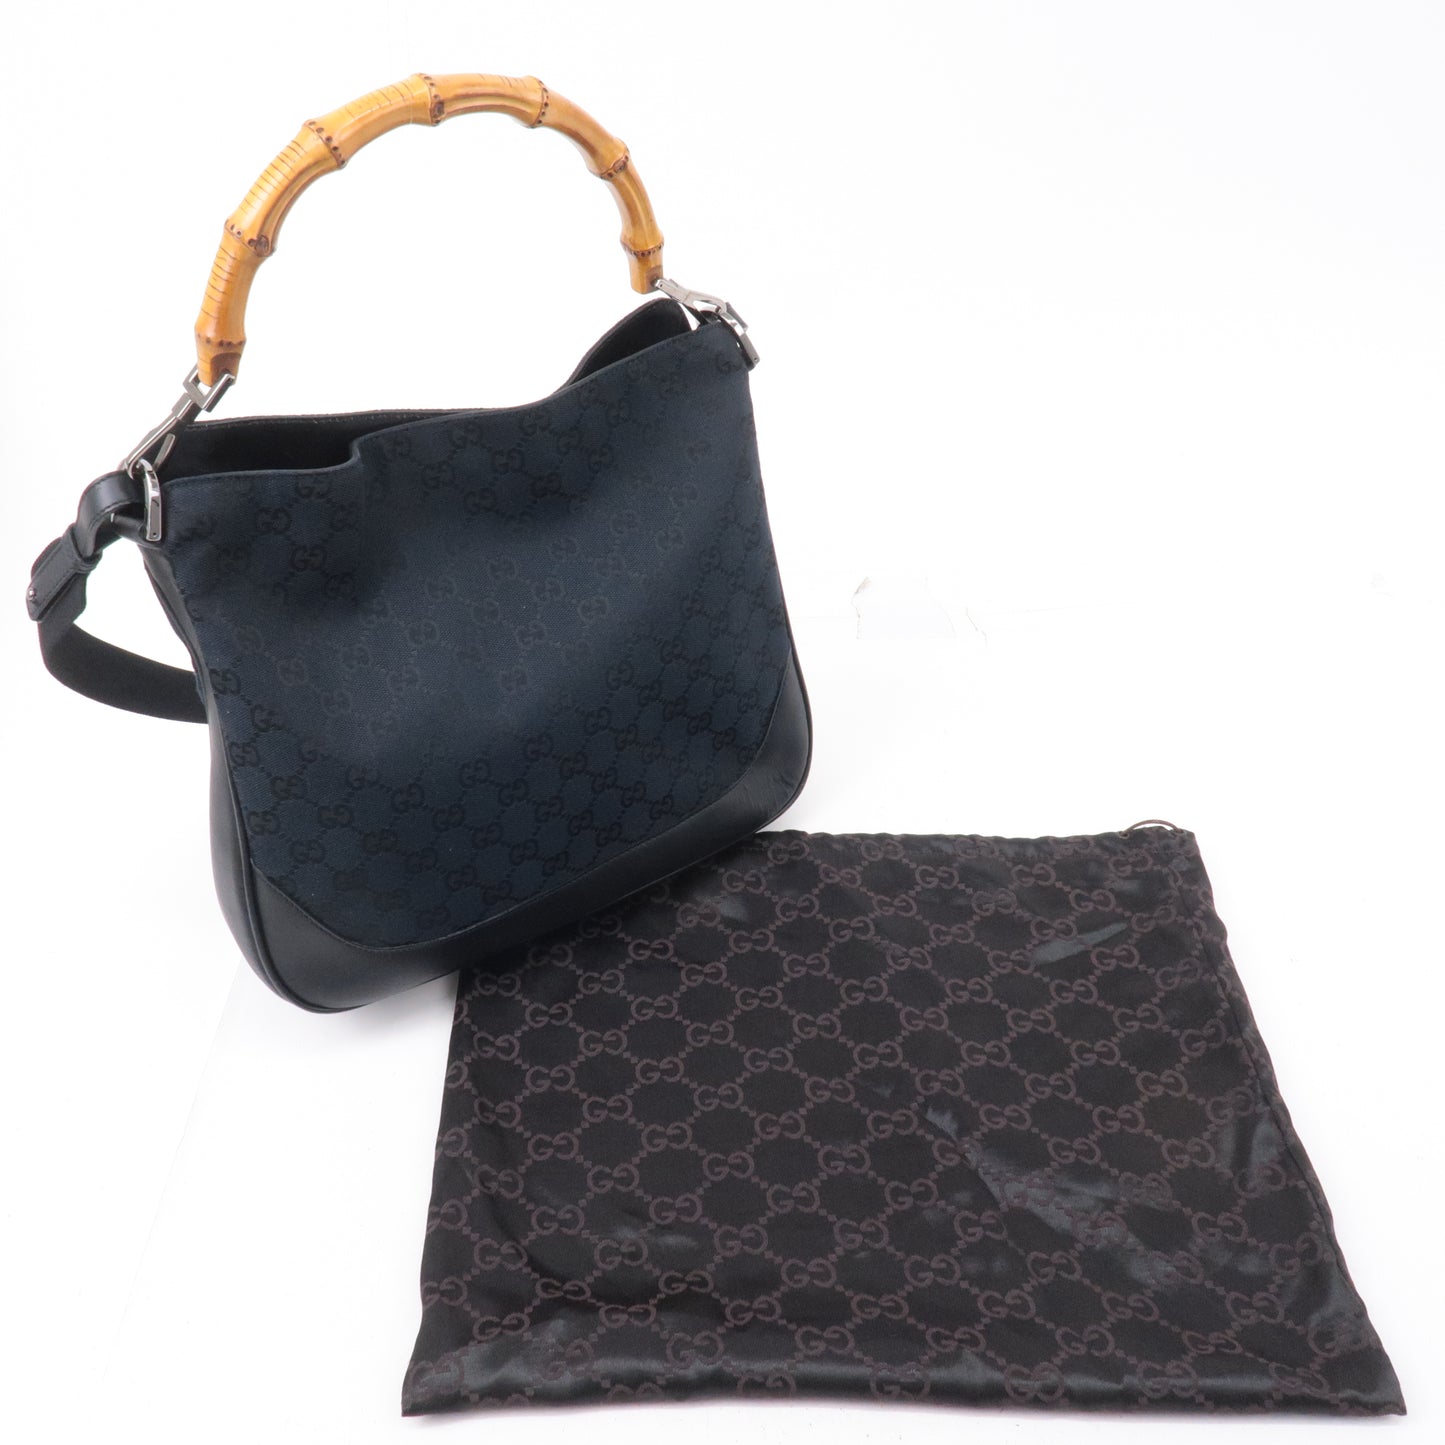 GUCCI Bamboo GG Canvas Leather 2Way Shoulder Bag Black 001.4095